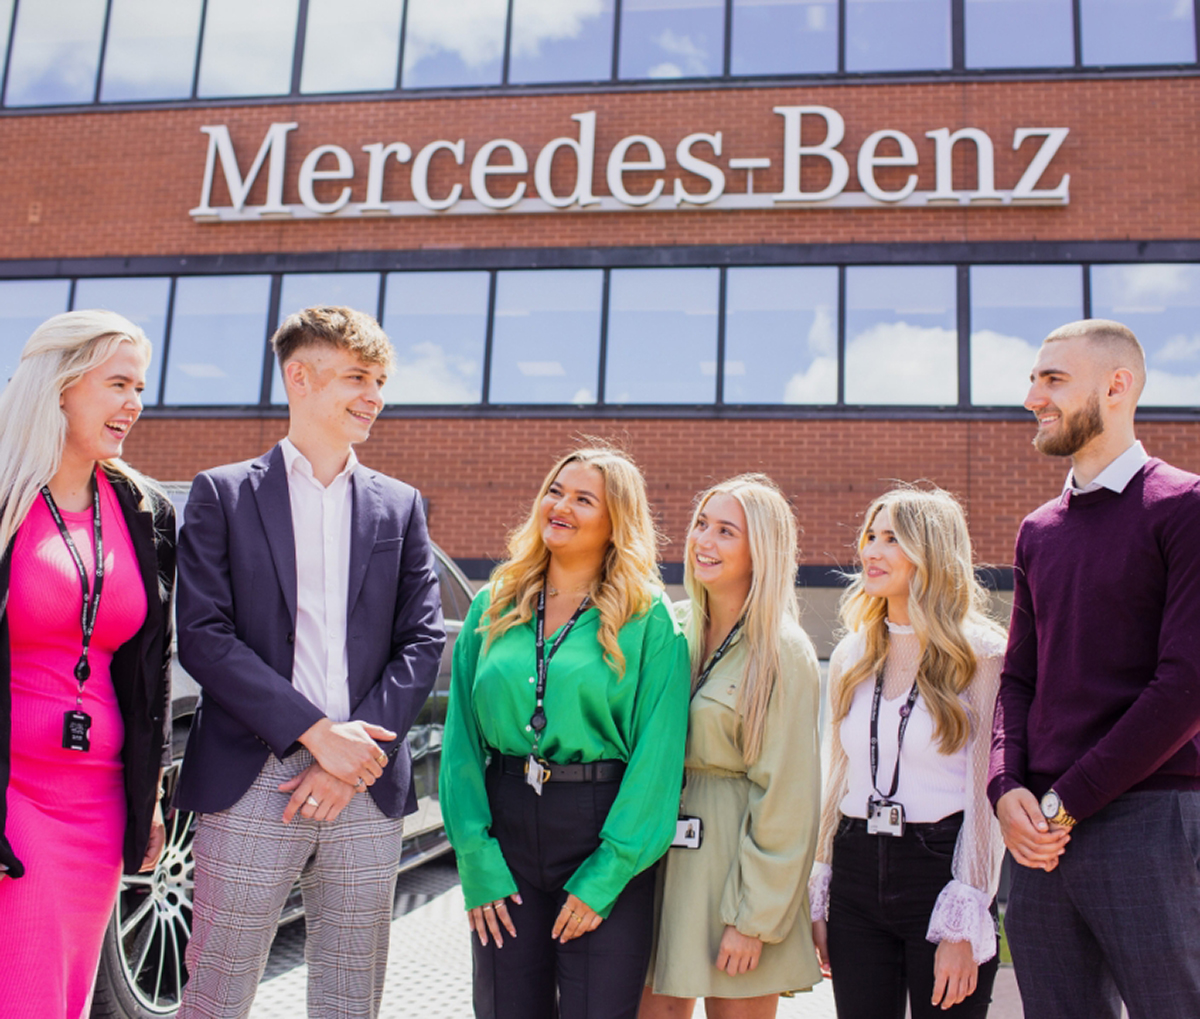 A group of people talking outside a building with a 'Mercedez-Benz' sign on the wall